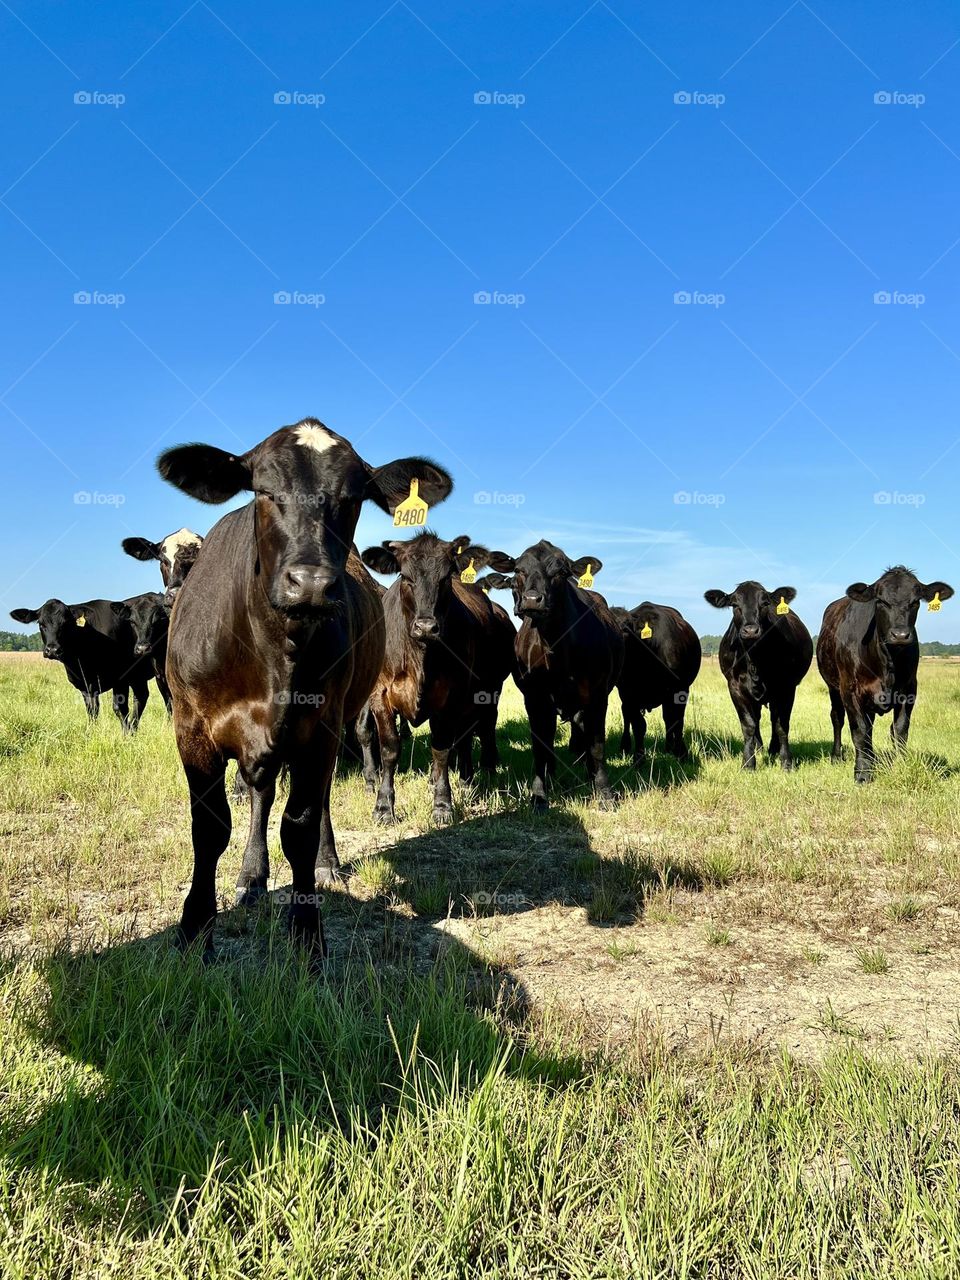 Herd of cows looking at the camera. They are in a sunny pasture and timid but curious.